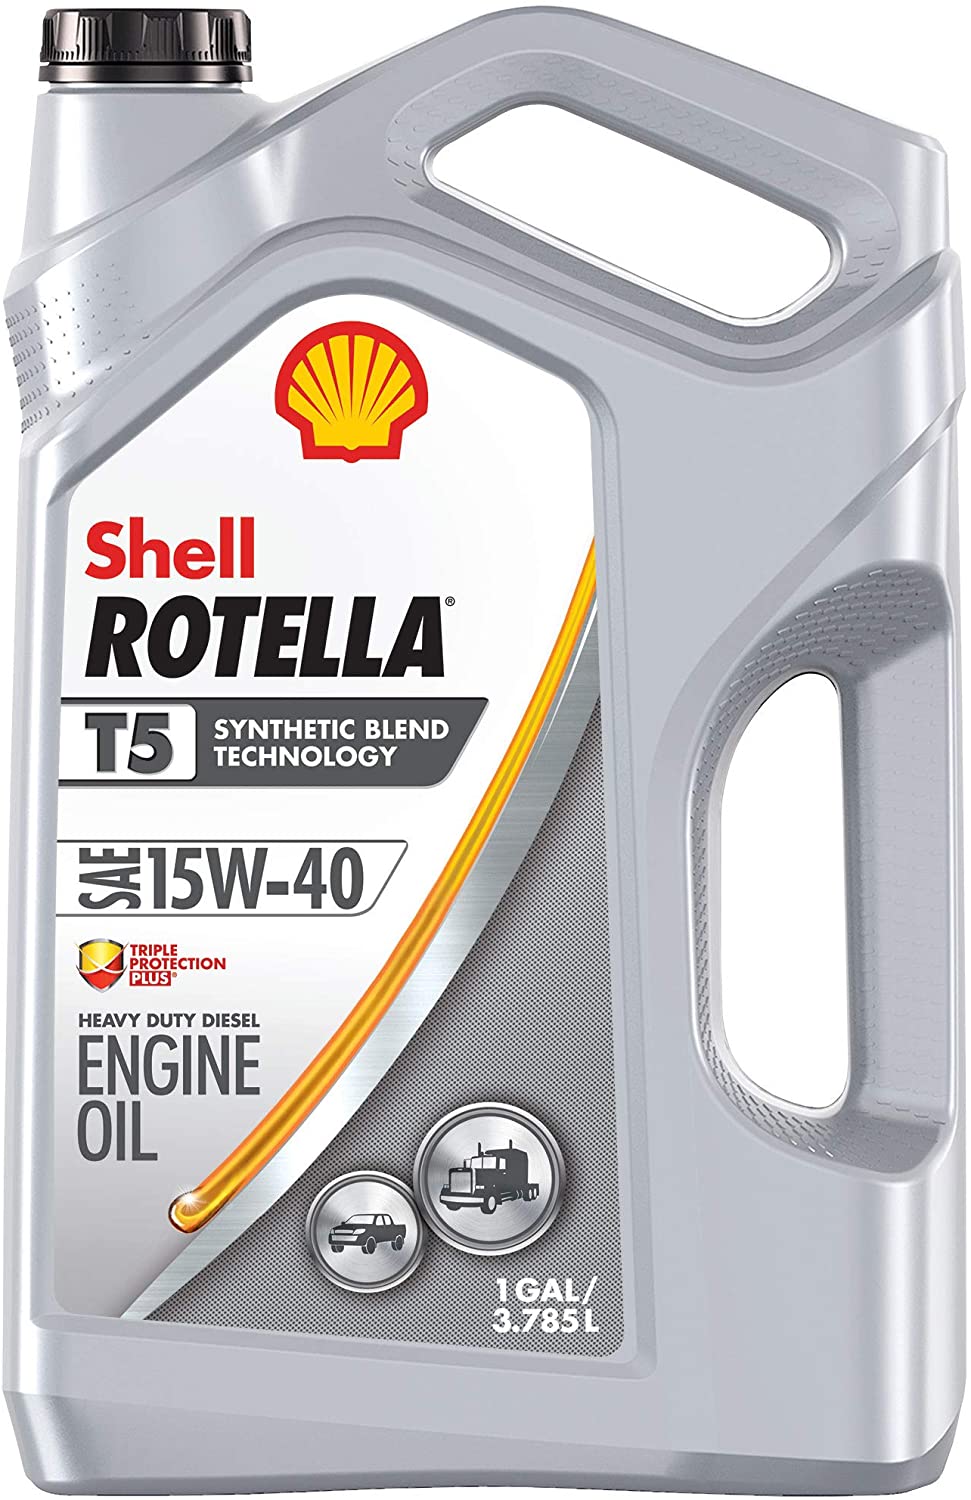 Shell Rotella T5 Synthetic Blend 15W-40 Diesel Engine Oil